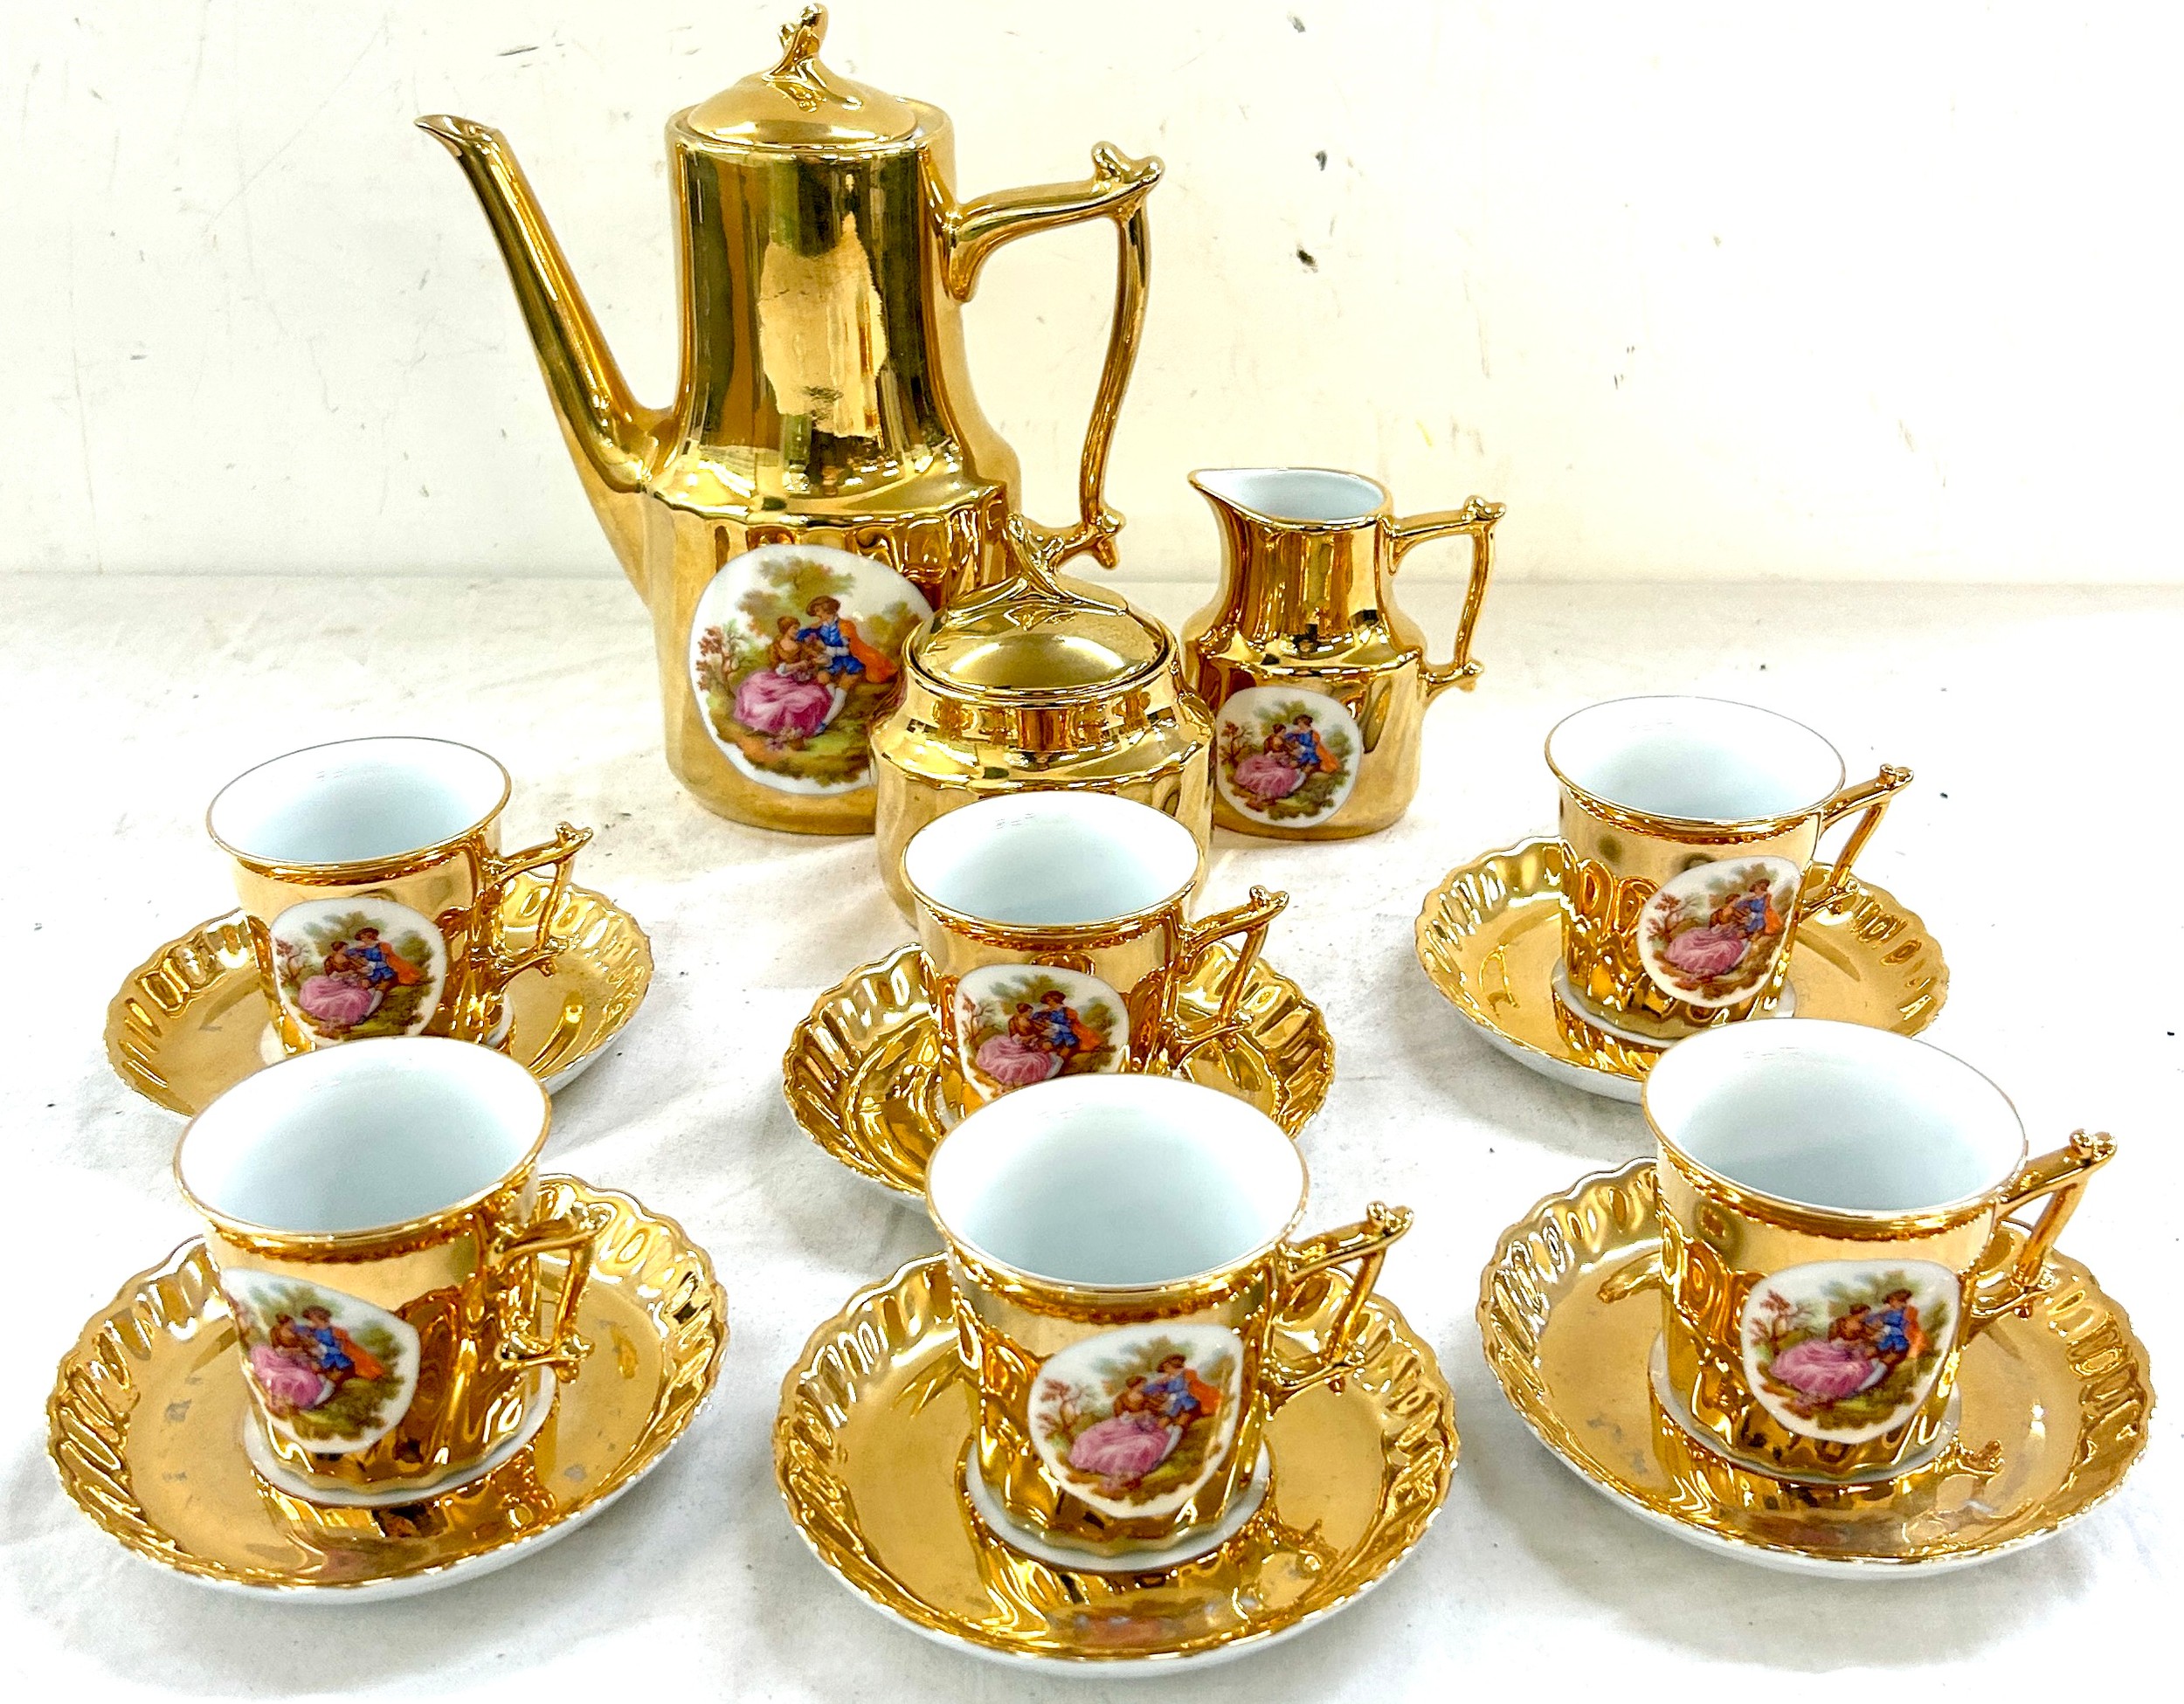 Gold Limoges coffee set comprising 6 cups, saucer, coffee pot, milk and sugar